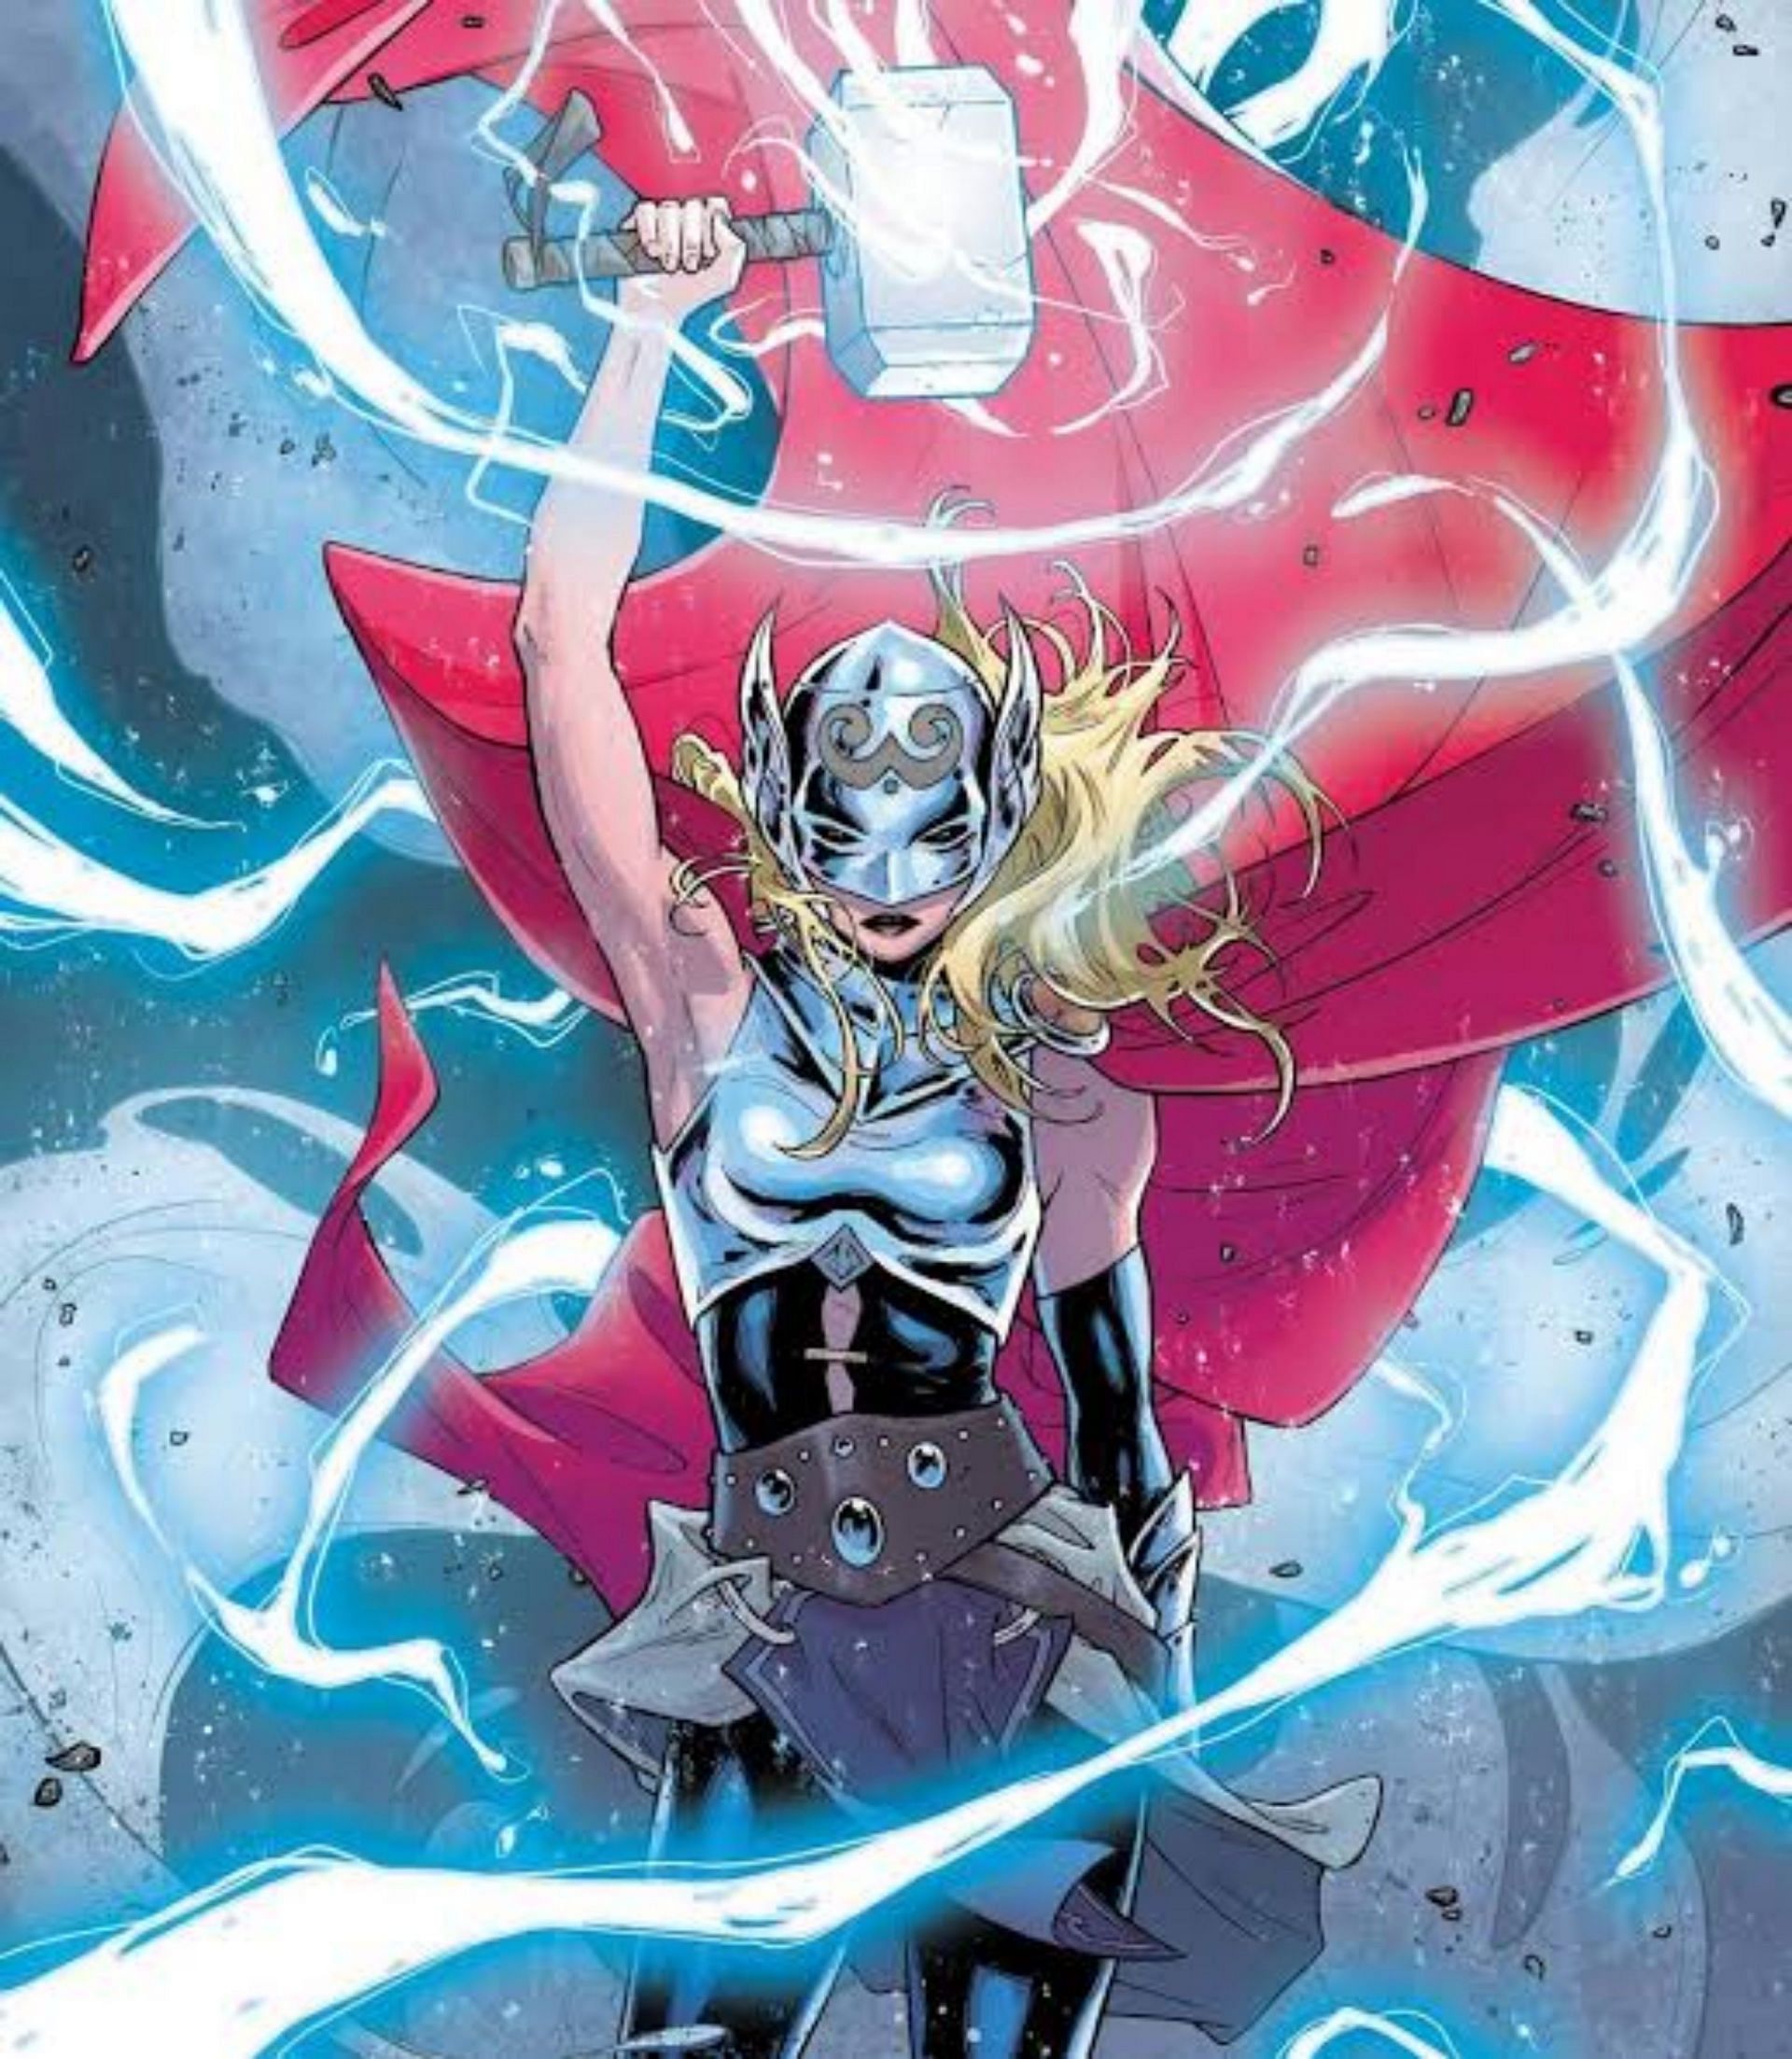 Mighty Thor from the comics (Image via Marvel Comics)